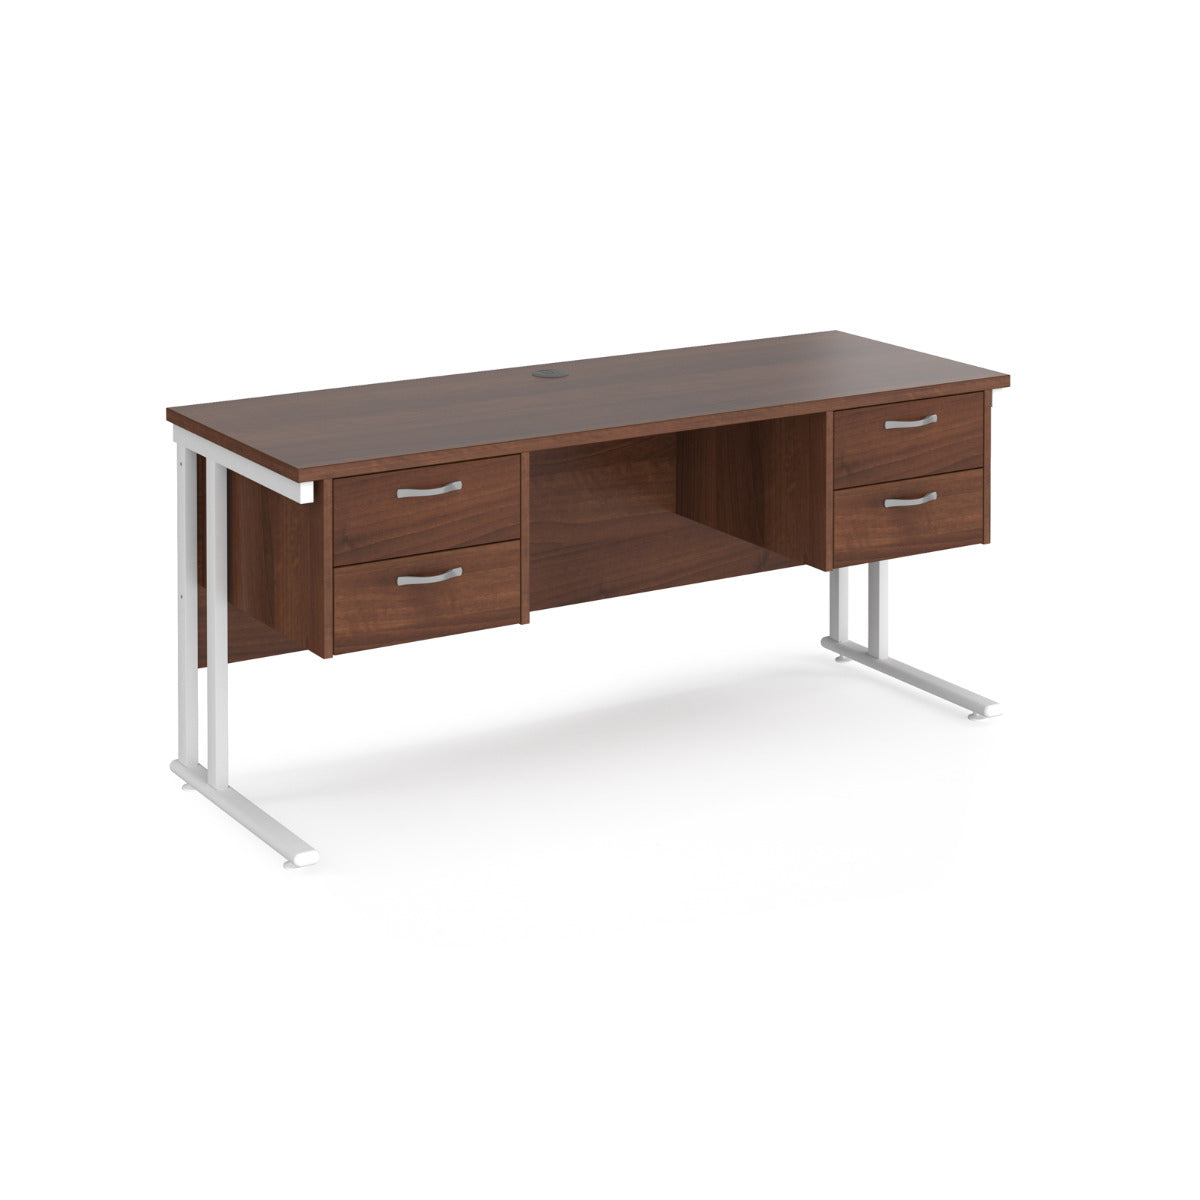 Maestro 600mm Deep Straight Cantilever Leg Office Desk with Two and Two Drawer Pedestal